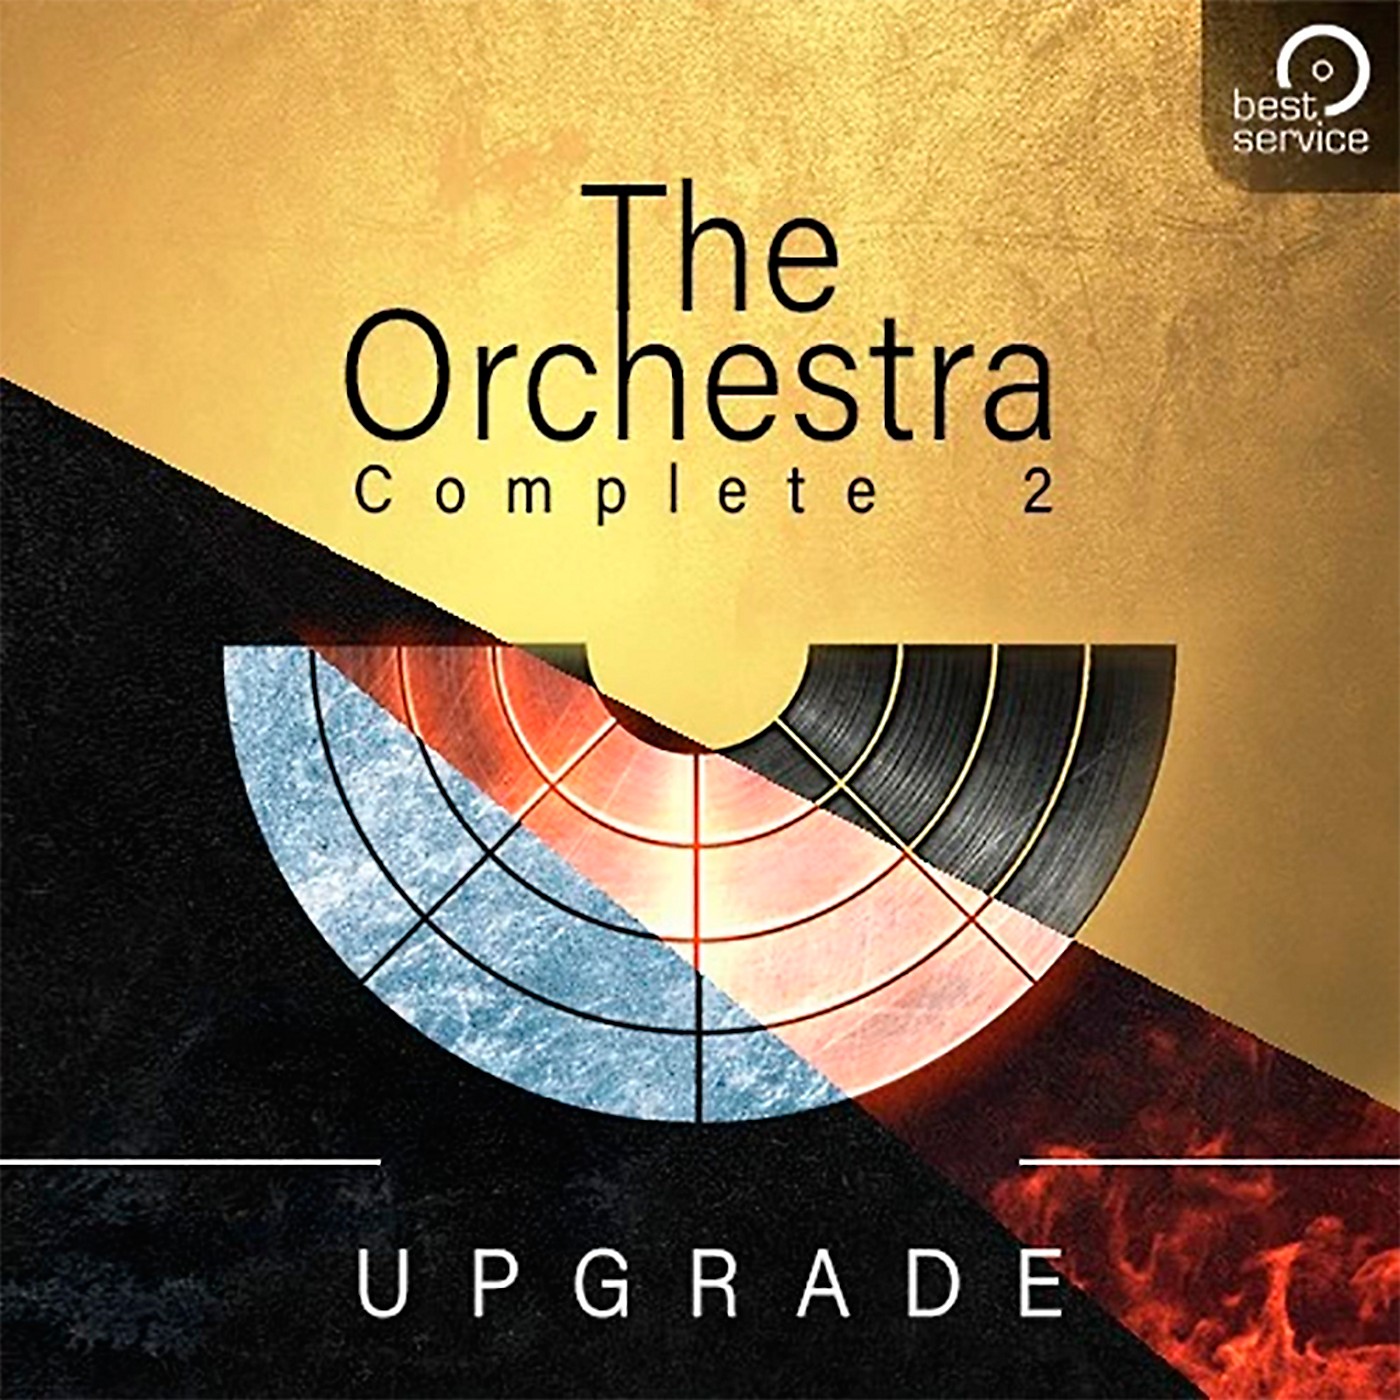 Best Service The Orchestra Complete 2 - Upgrade from The Orchestra 1 thumbnail